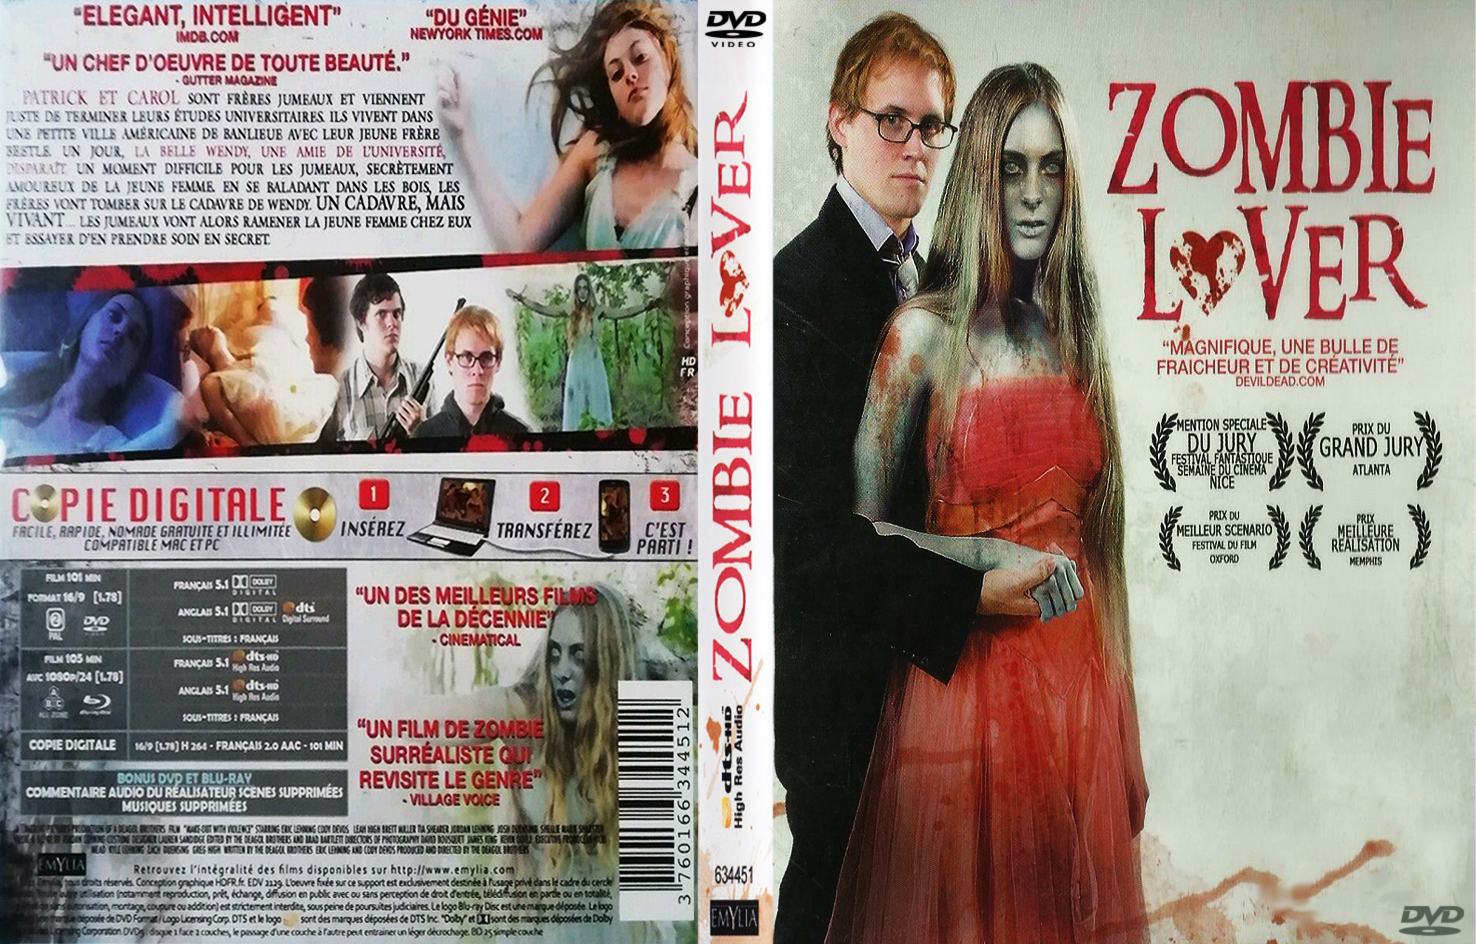 Jaquette DVD Zombie Lover